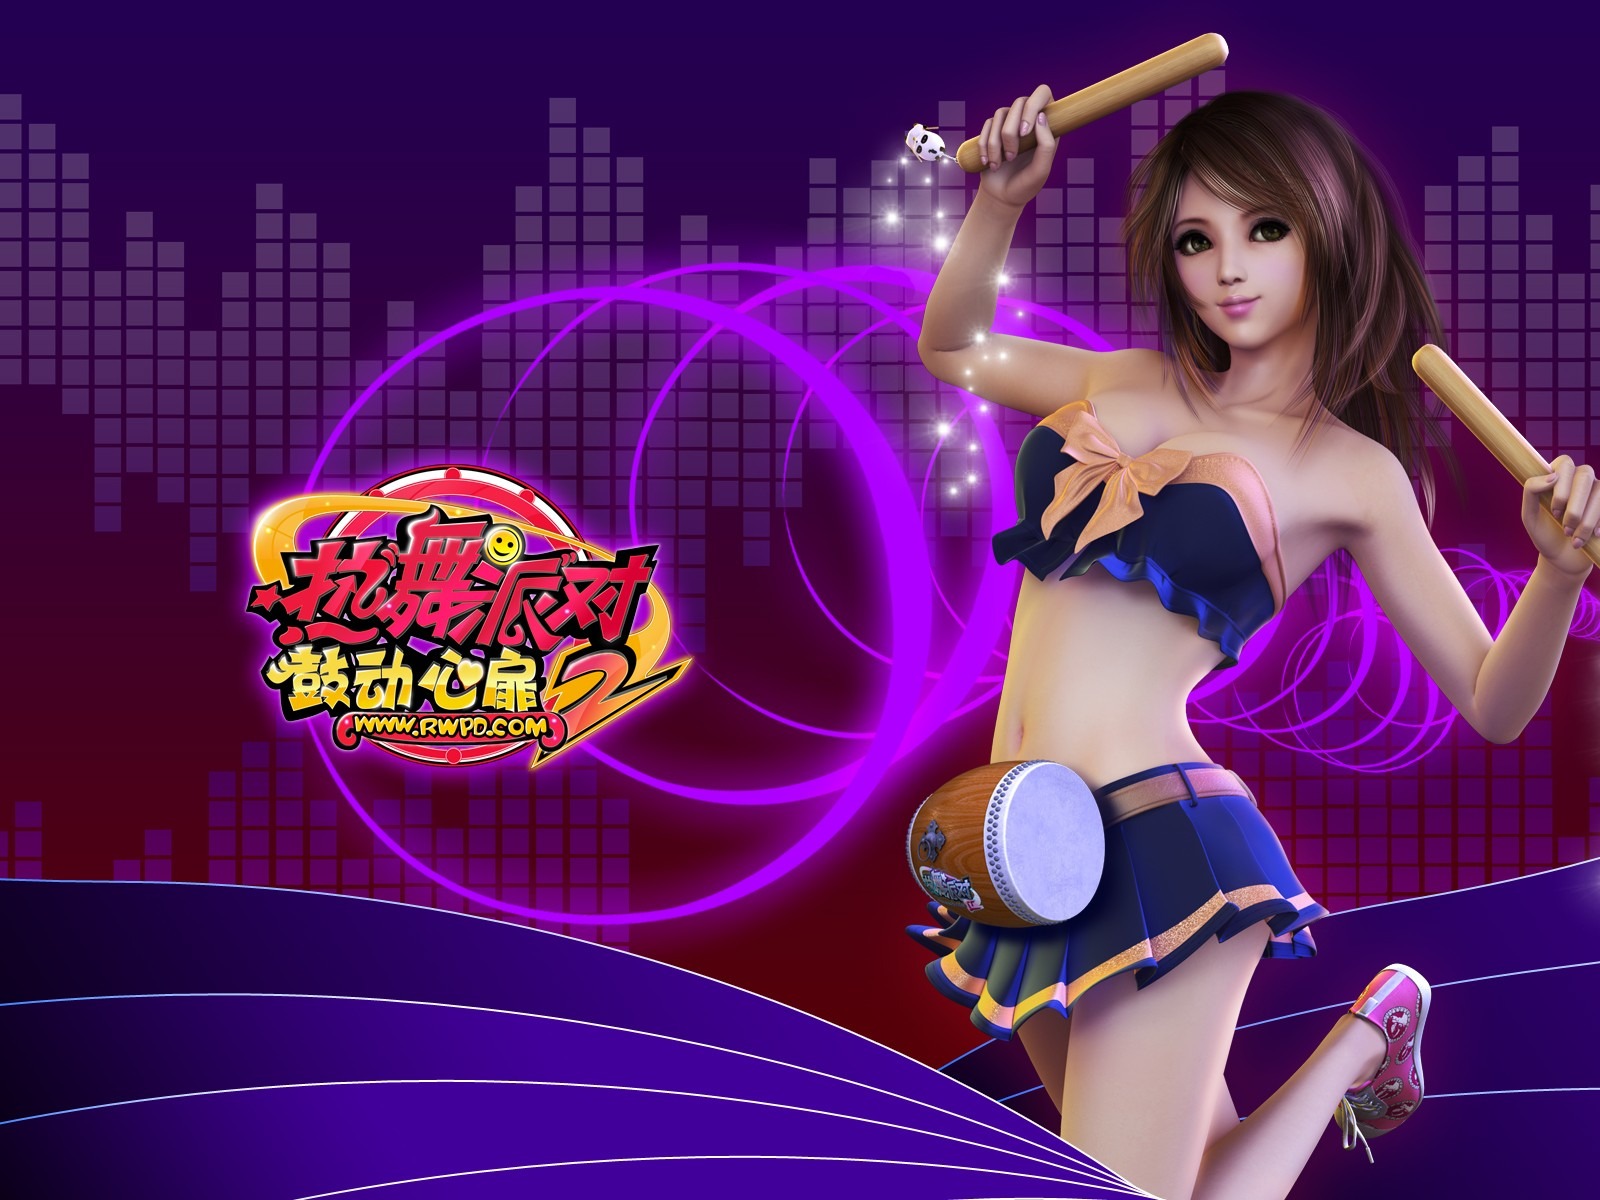 Online game Hot Dance Party II official wallpapers #17 - 1600x1200